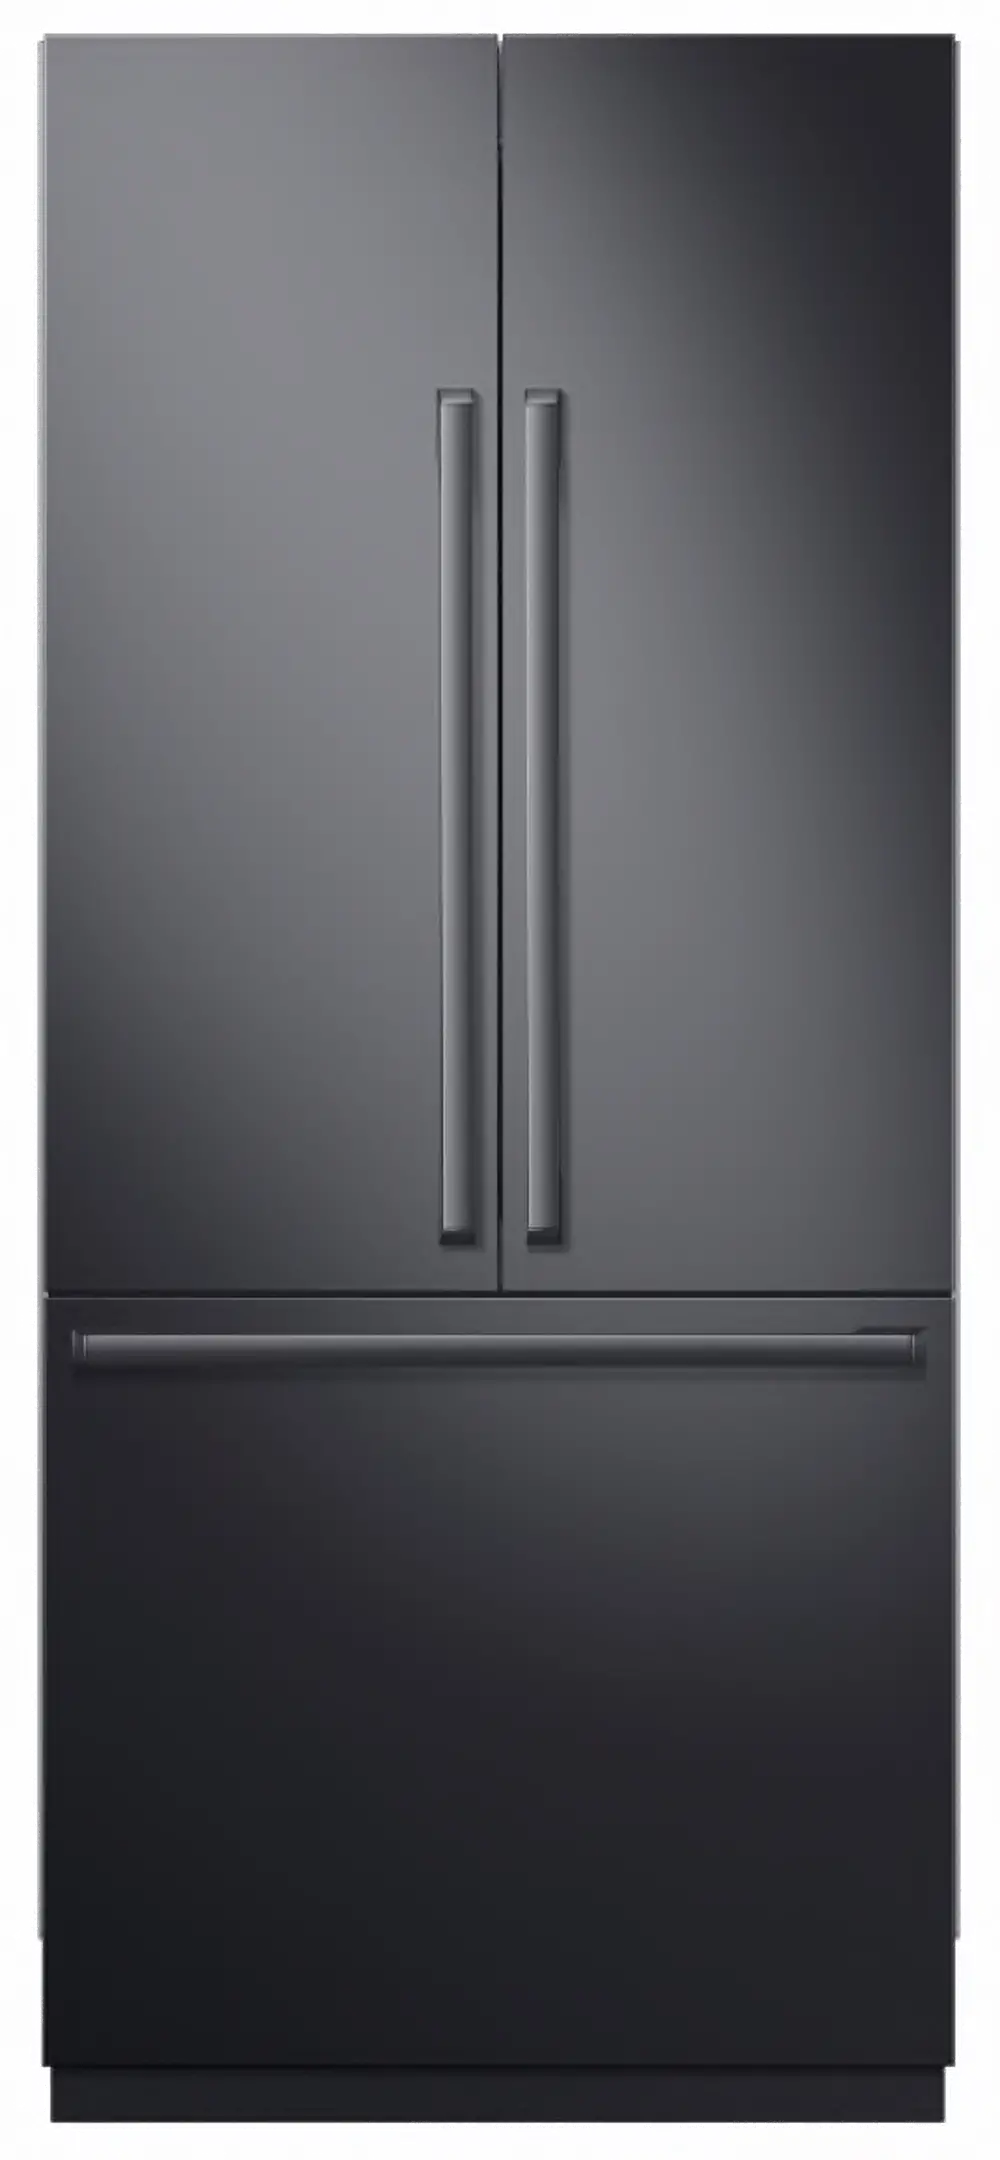 RAF36ACAAMS Samsung Chef Accessory Kit for 36 Inch Built In Refrigerator - Black Stainless Steel-1